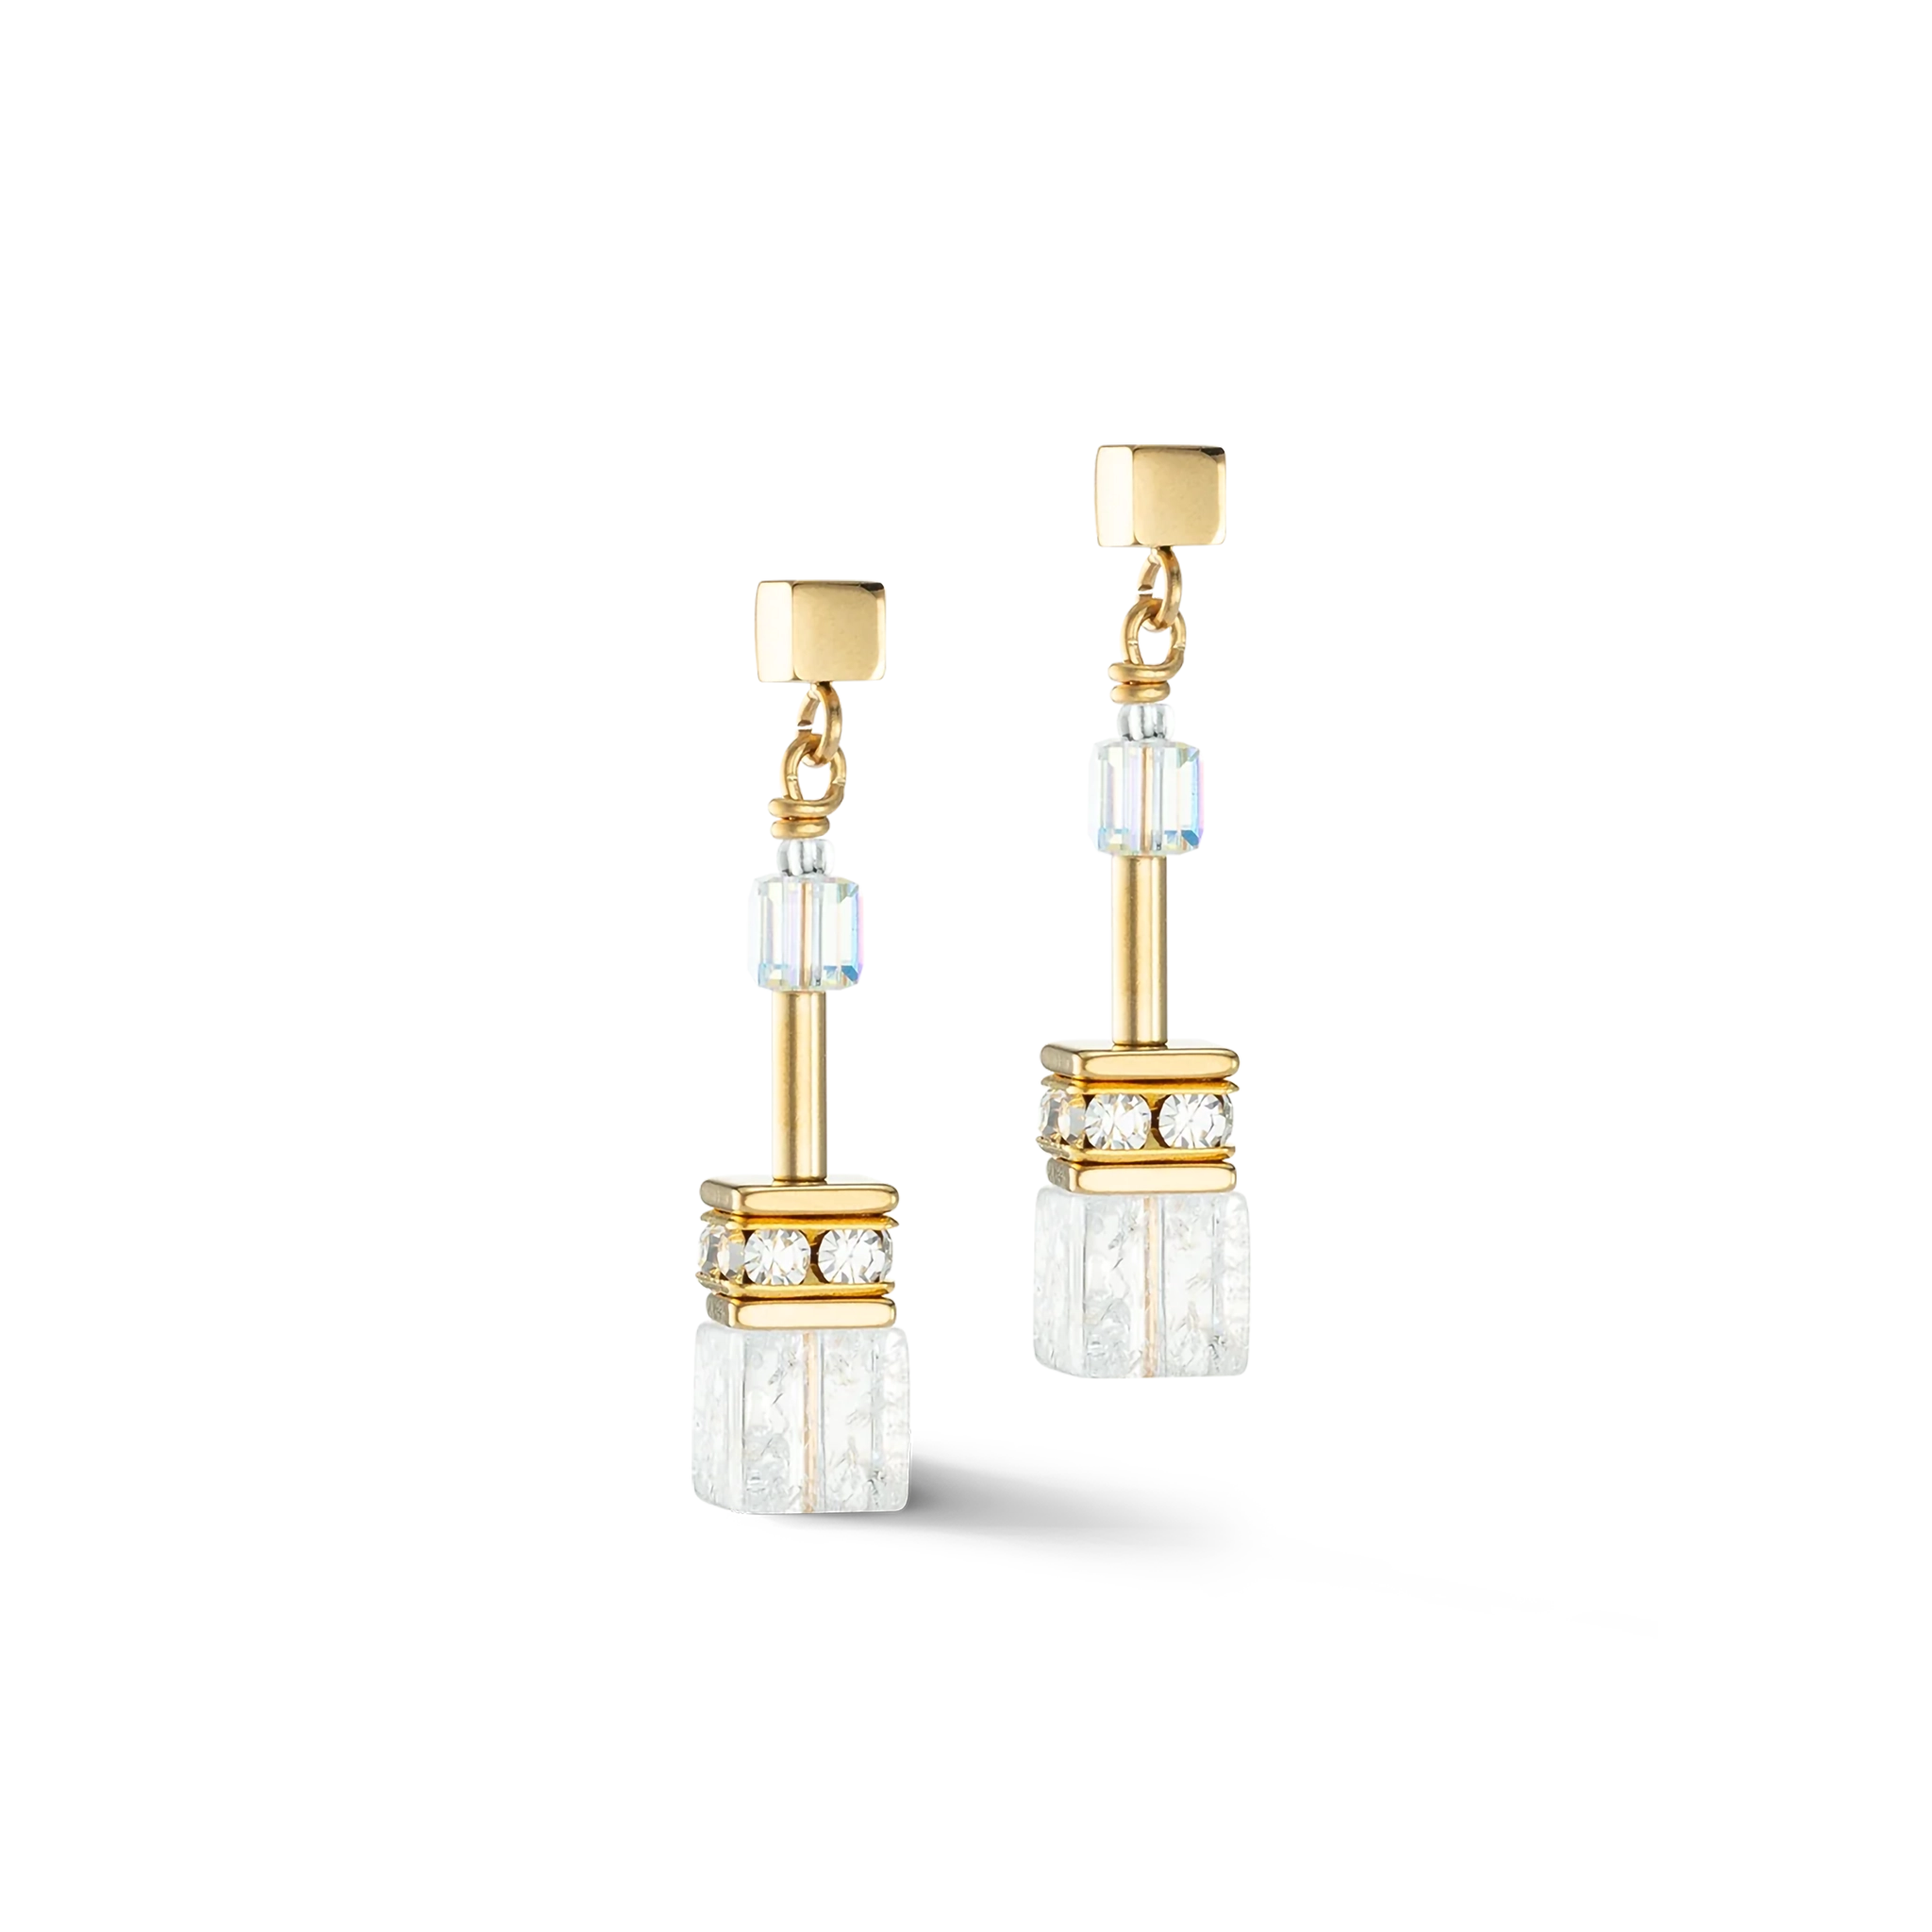 A pair of gold drop earrings featuring cube shaped white rock crystals